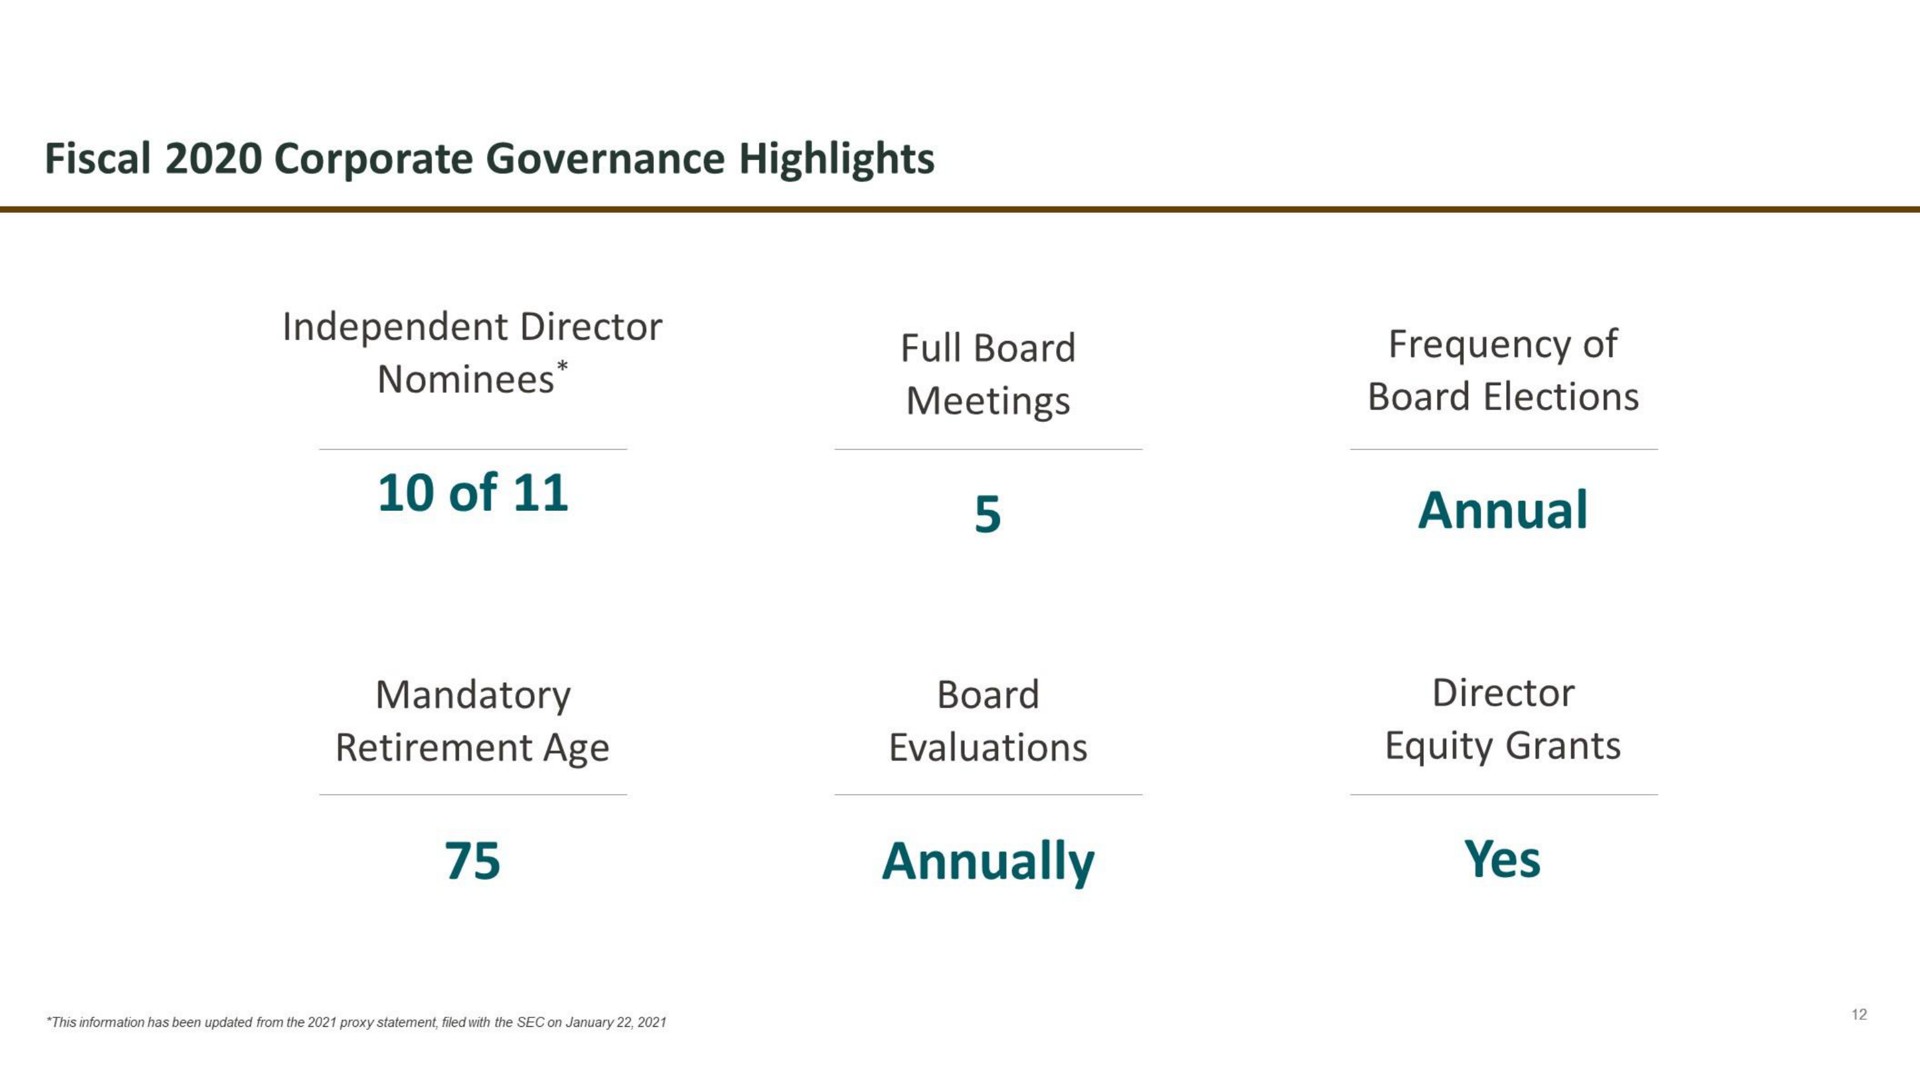 fiscal corporate governance highlights independent director nominees of mandatory retirement age full board meetings board evaluations annually frequency of board elections annual director equity grants yes | Starbucks